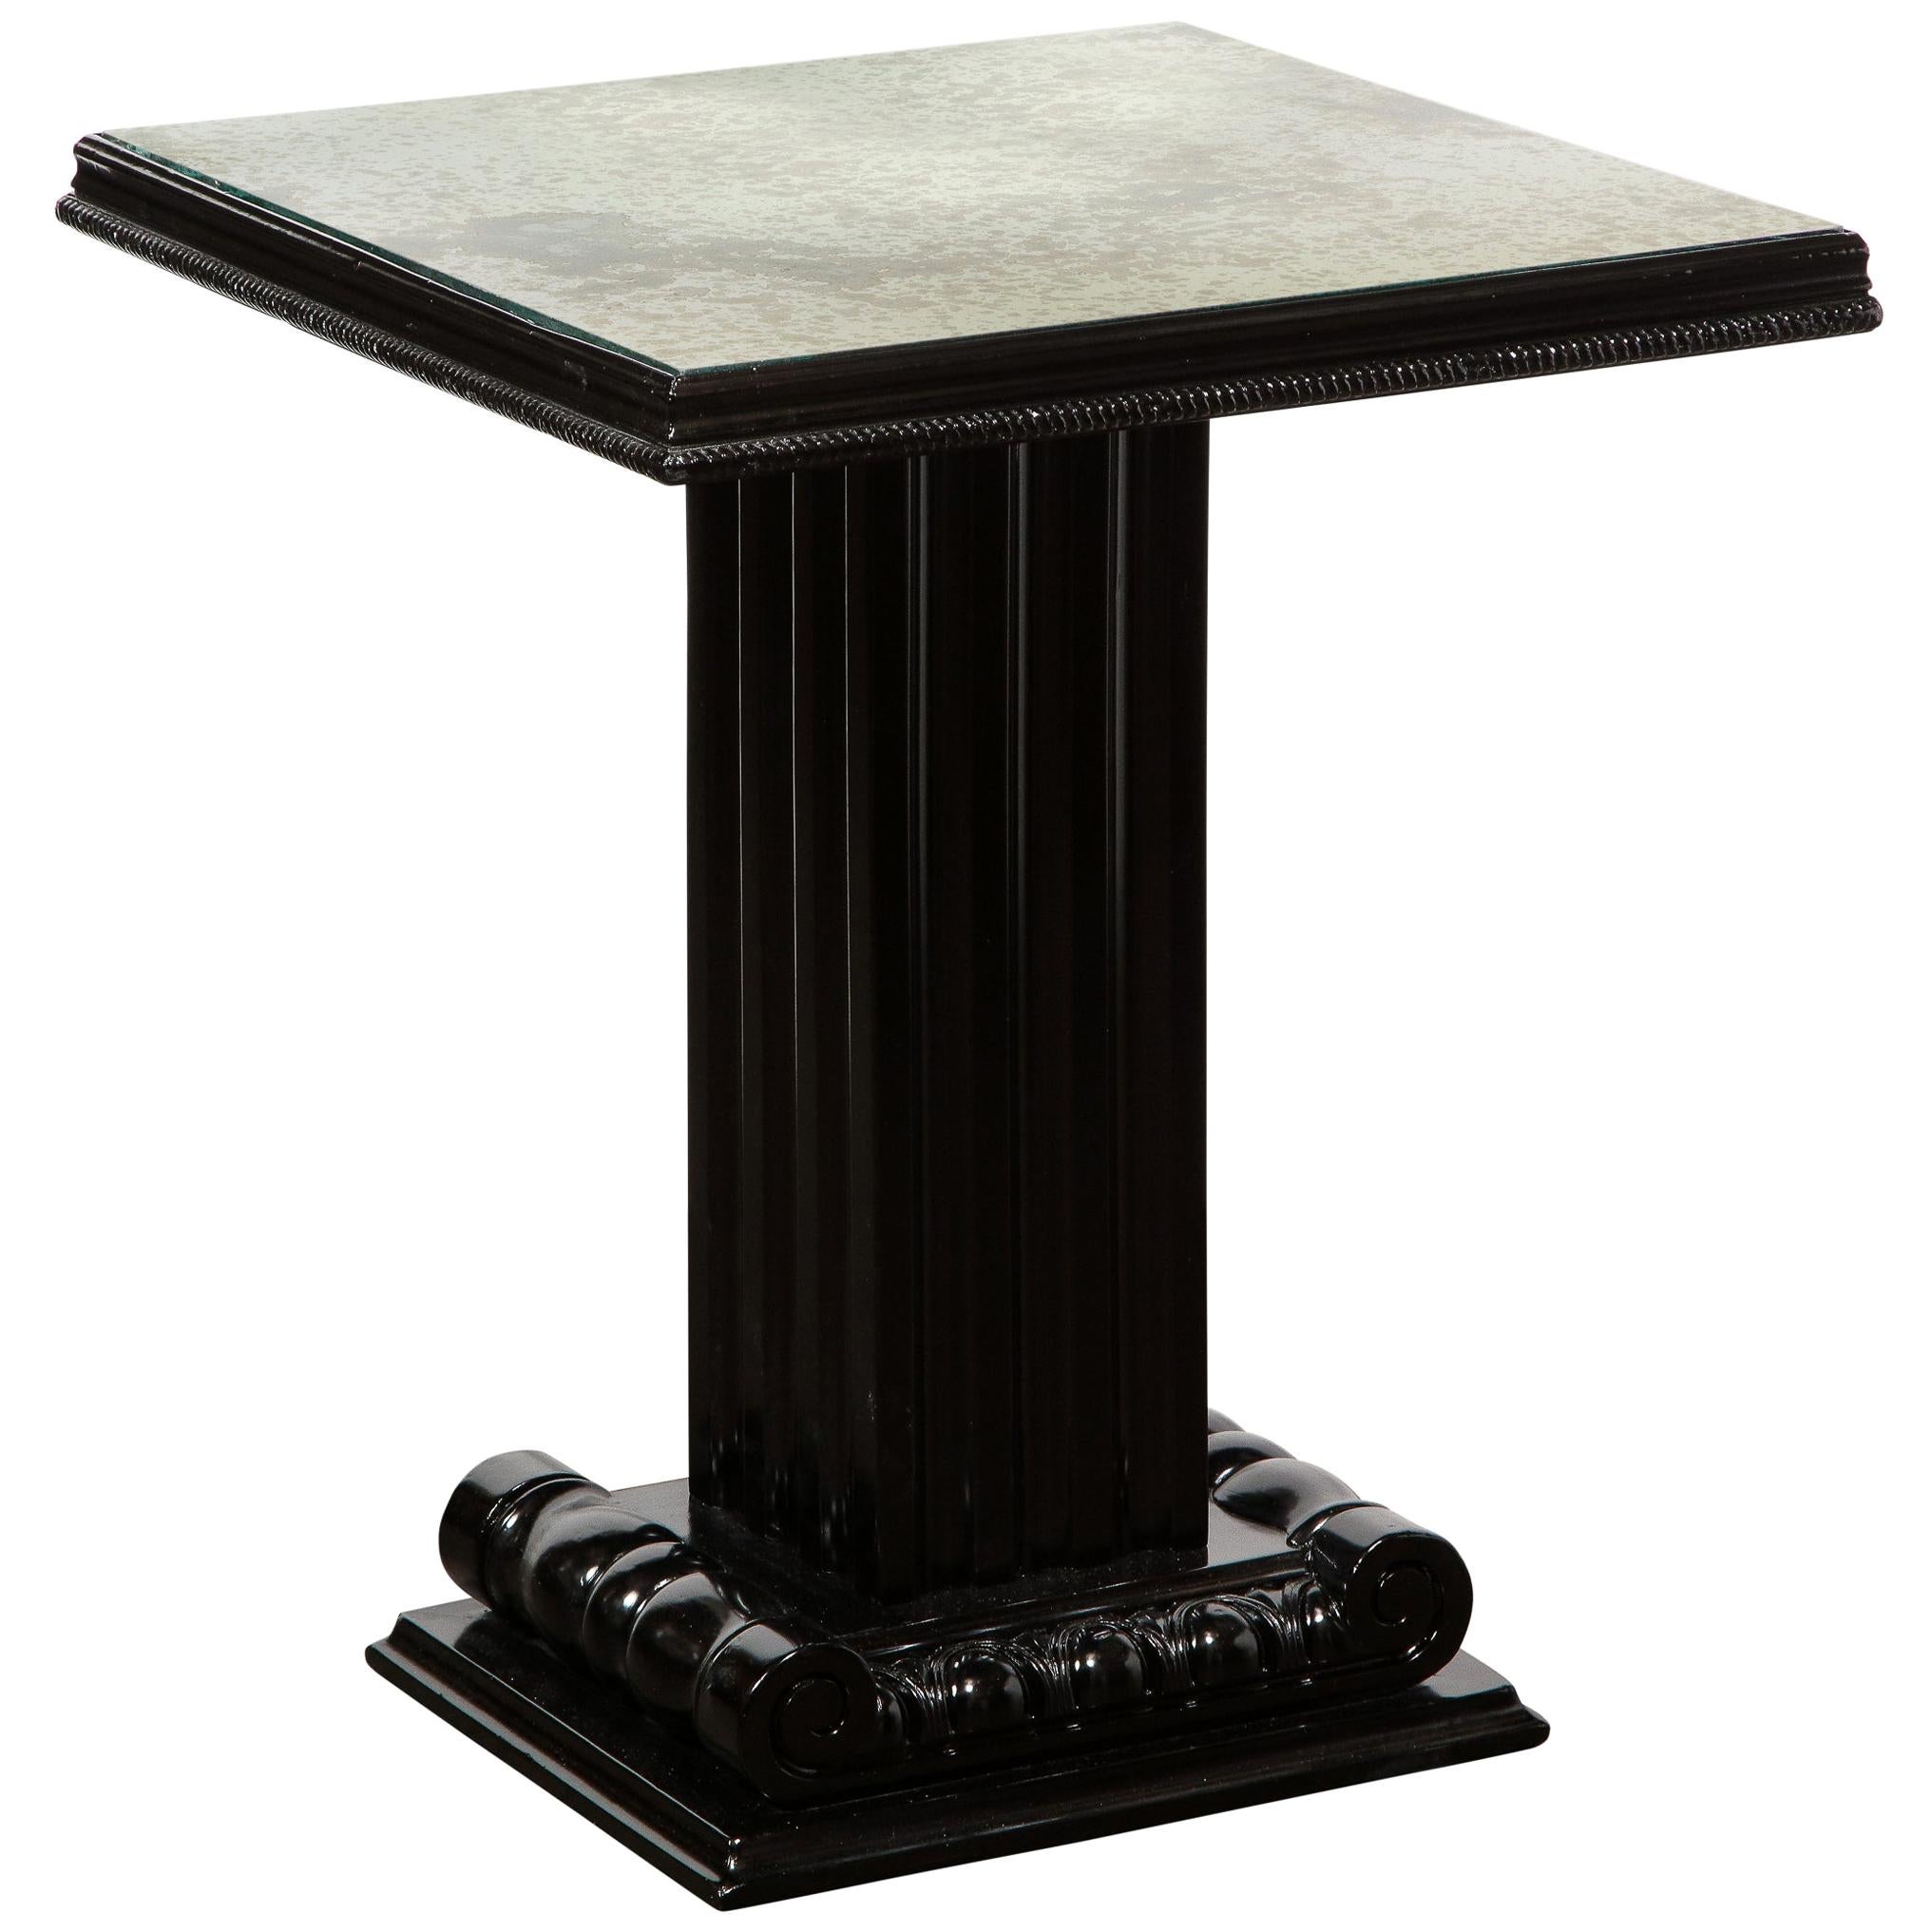 Art Deco Black Lacquer Occasional Table with Antique Mirror by Grosfeld House